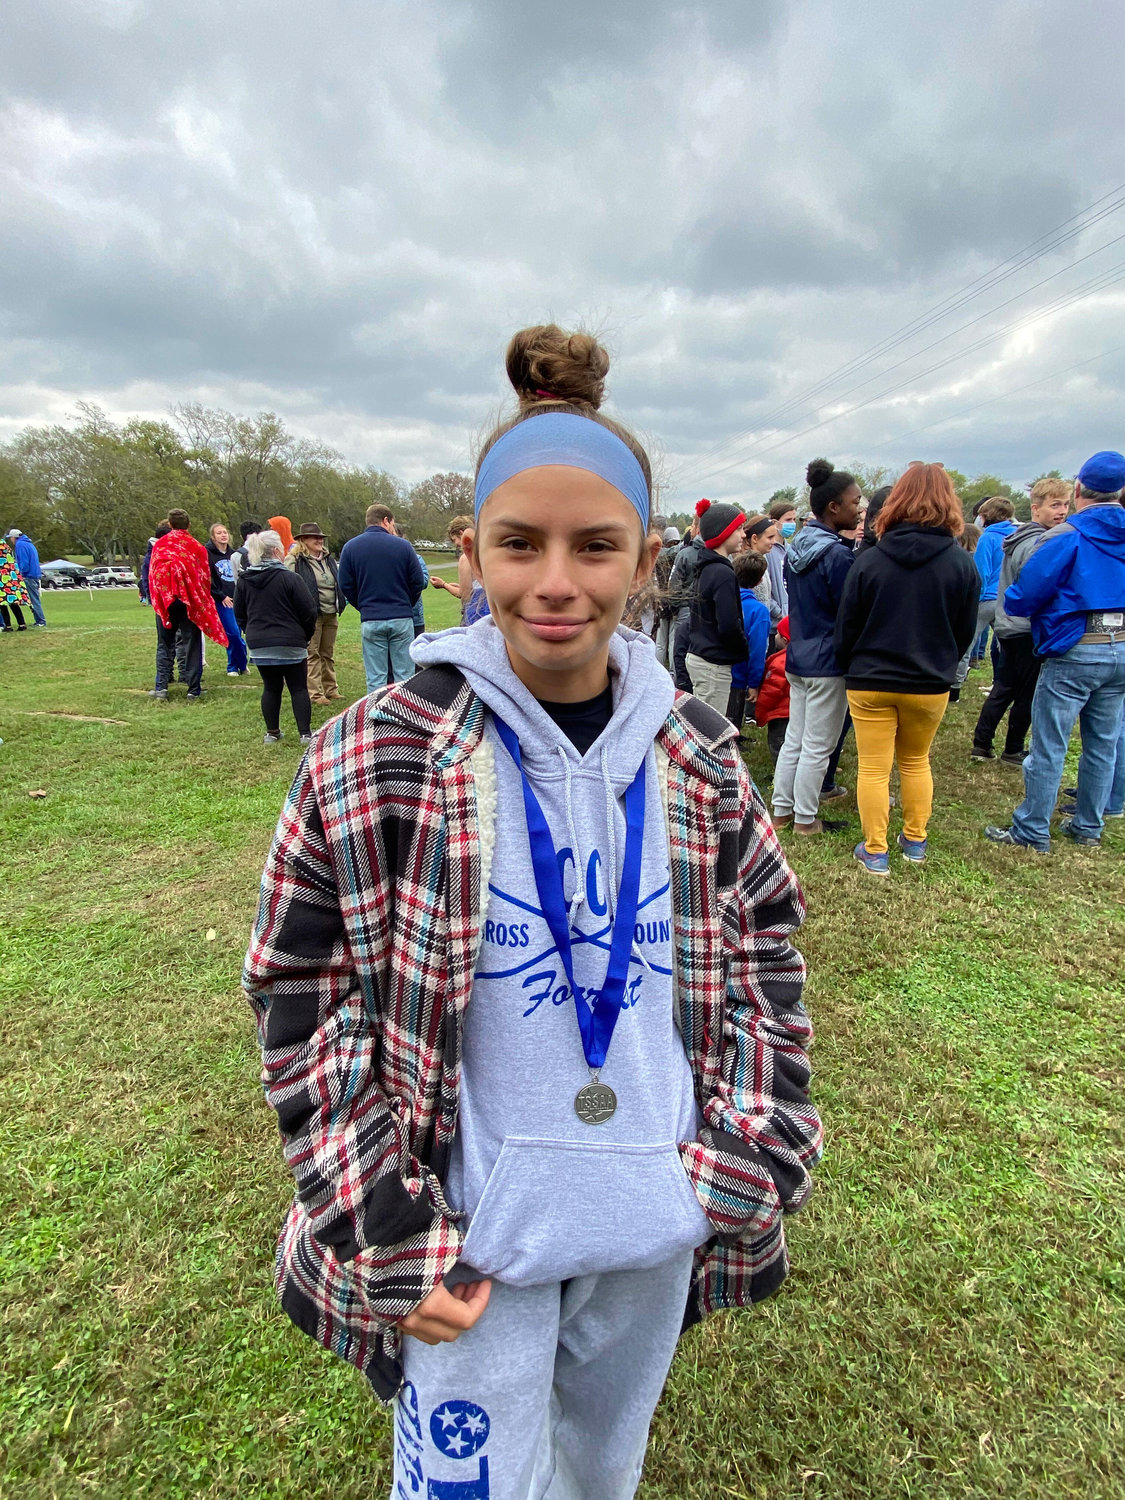 Forrest sophomore Jaedyn Stalnecker finished in second place in the region meet and will make try to improve on her fourth-place finish last season at the state championships.